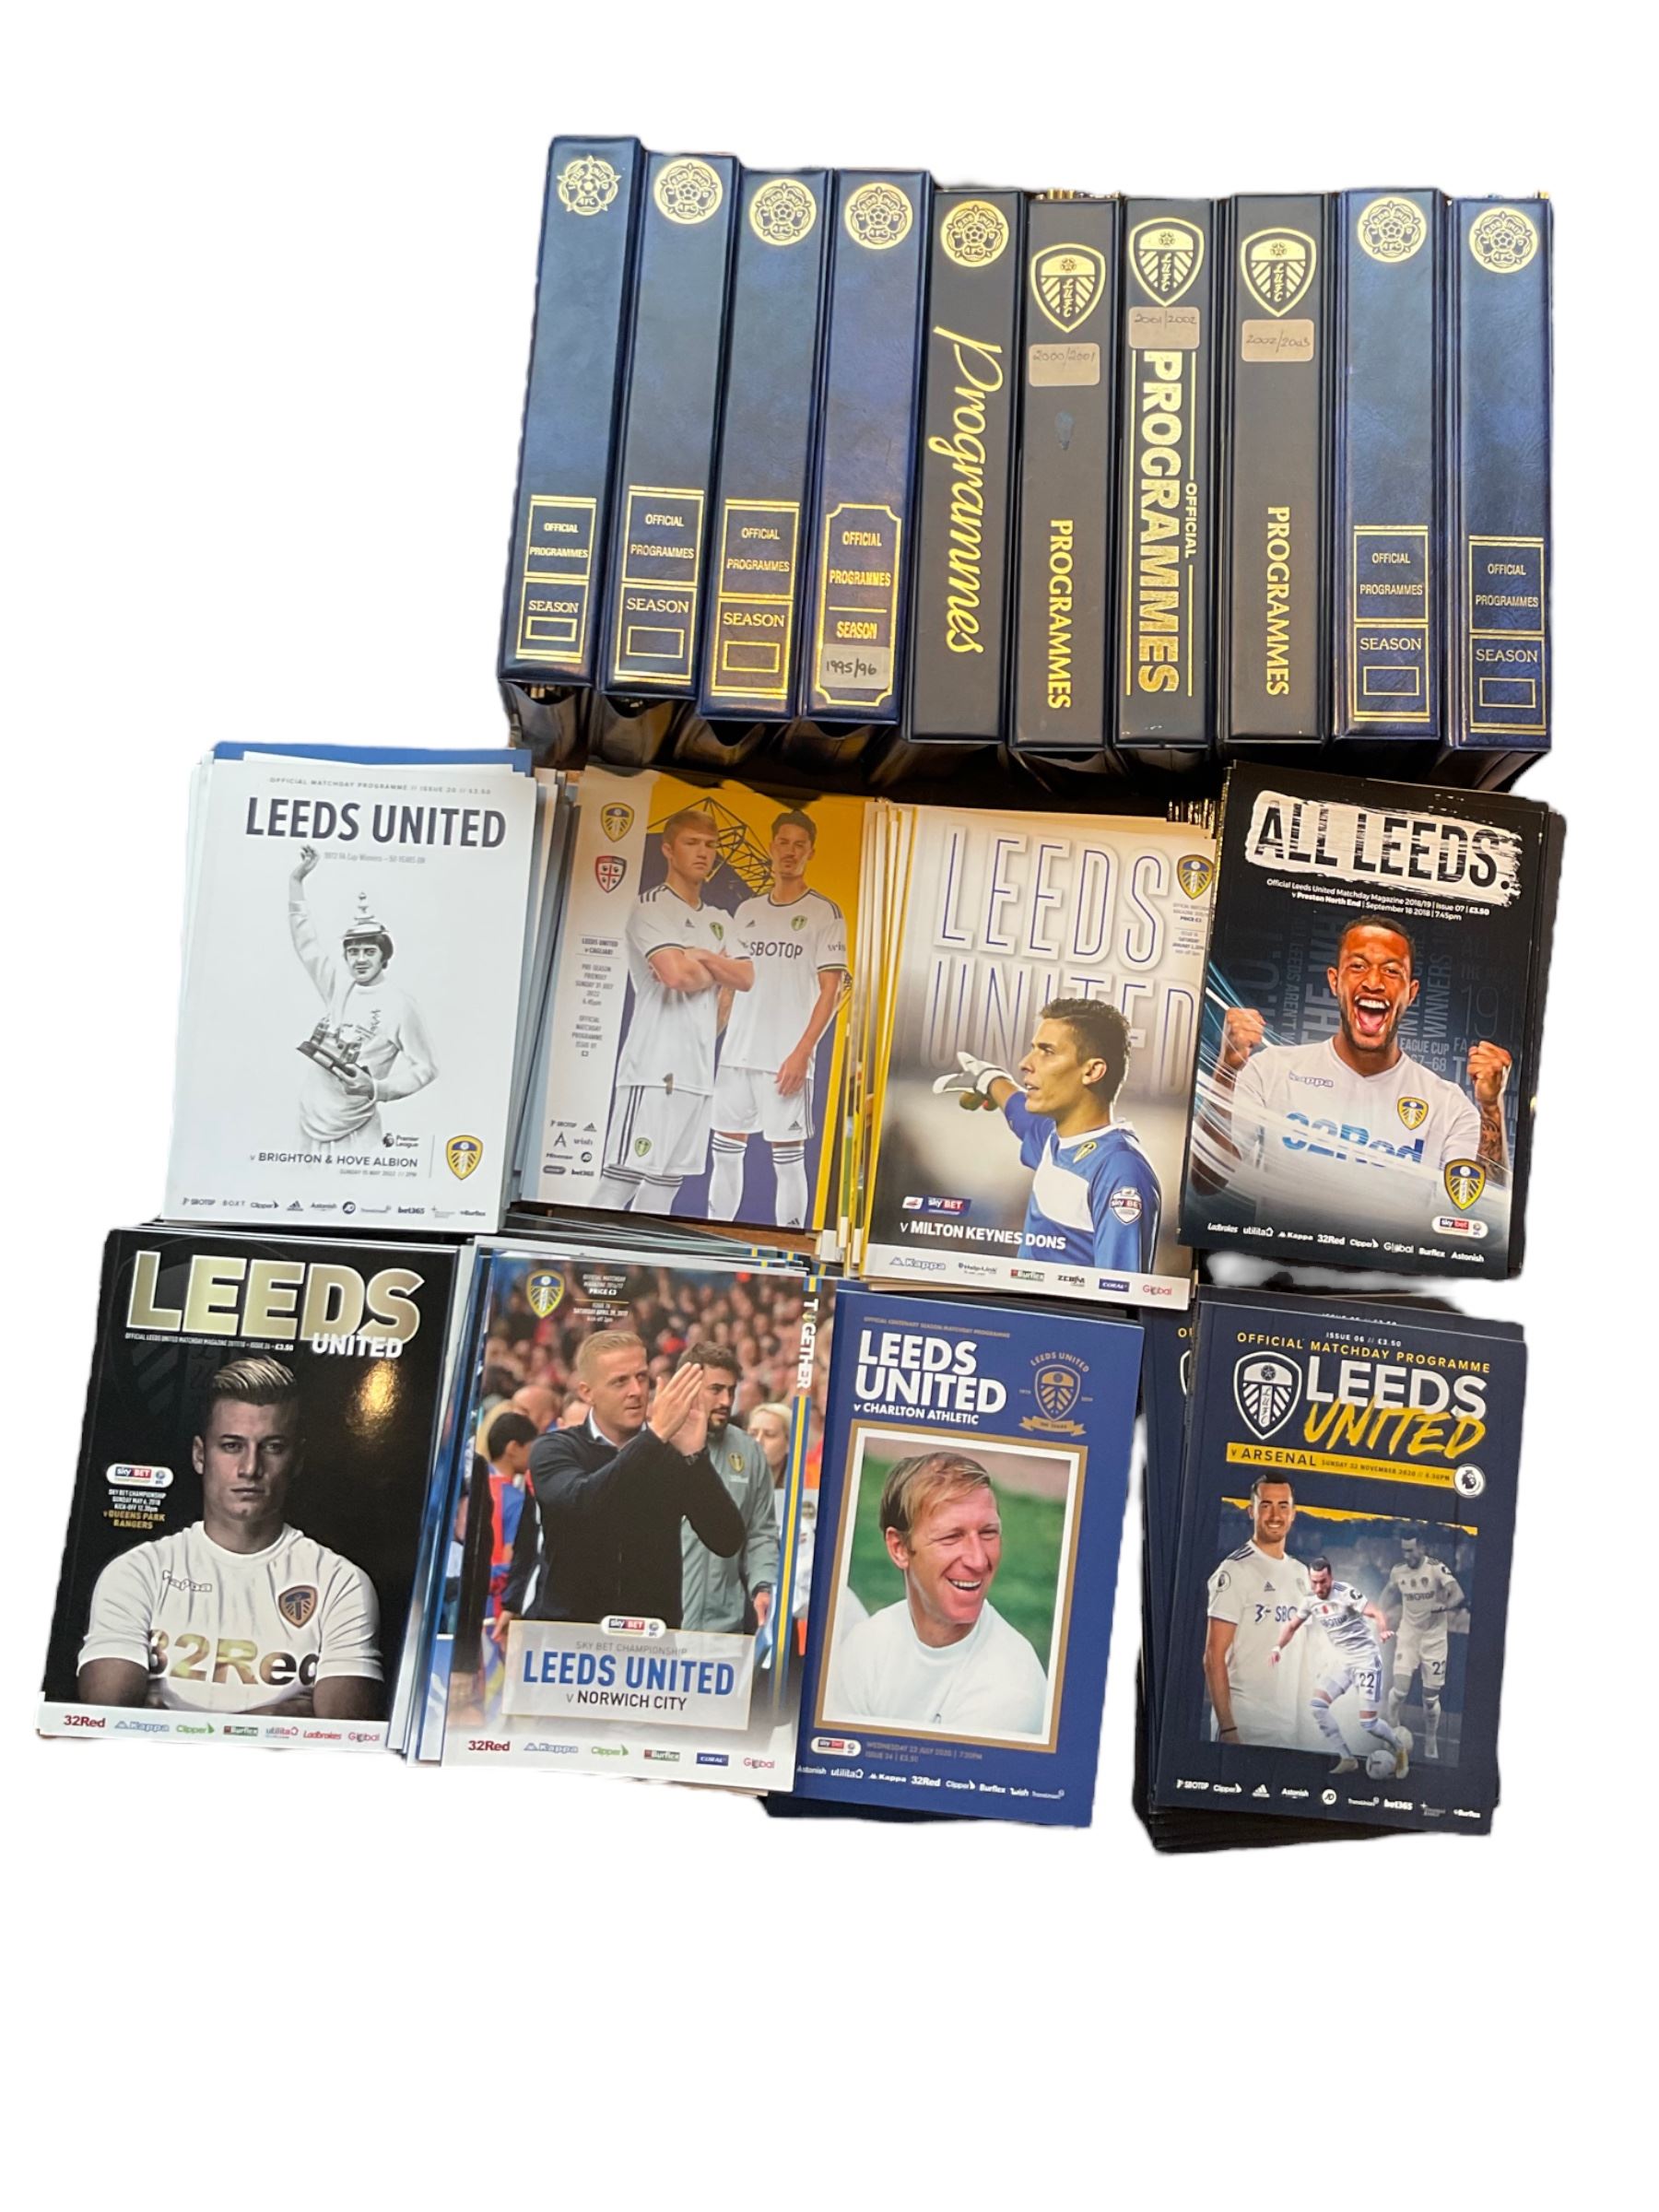 Leeds United football club - over three-hundred home game programmes including